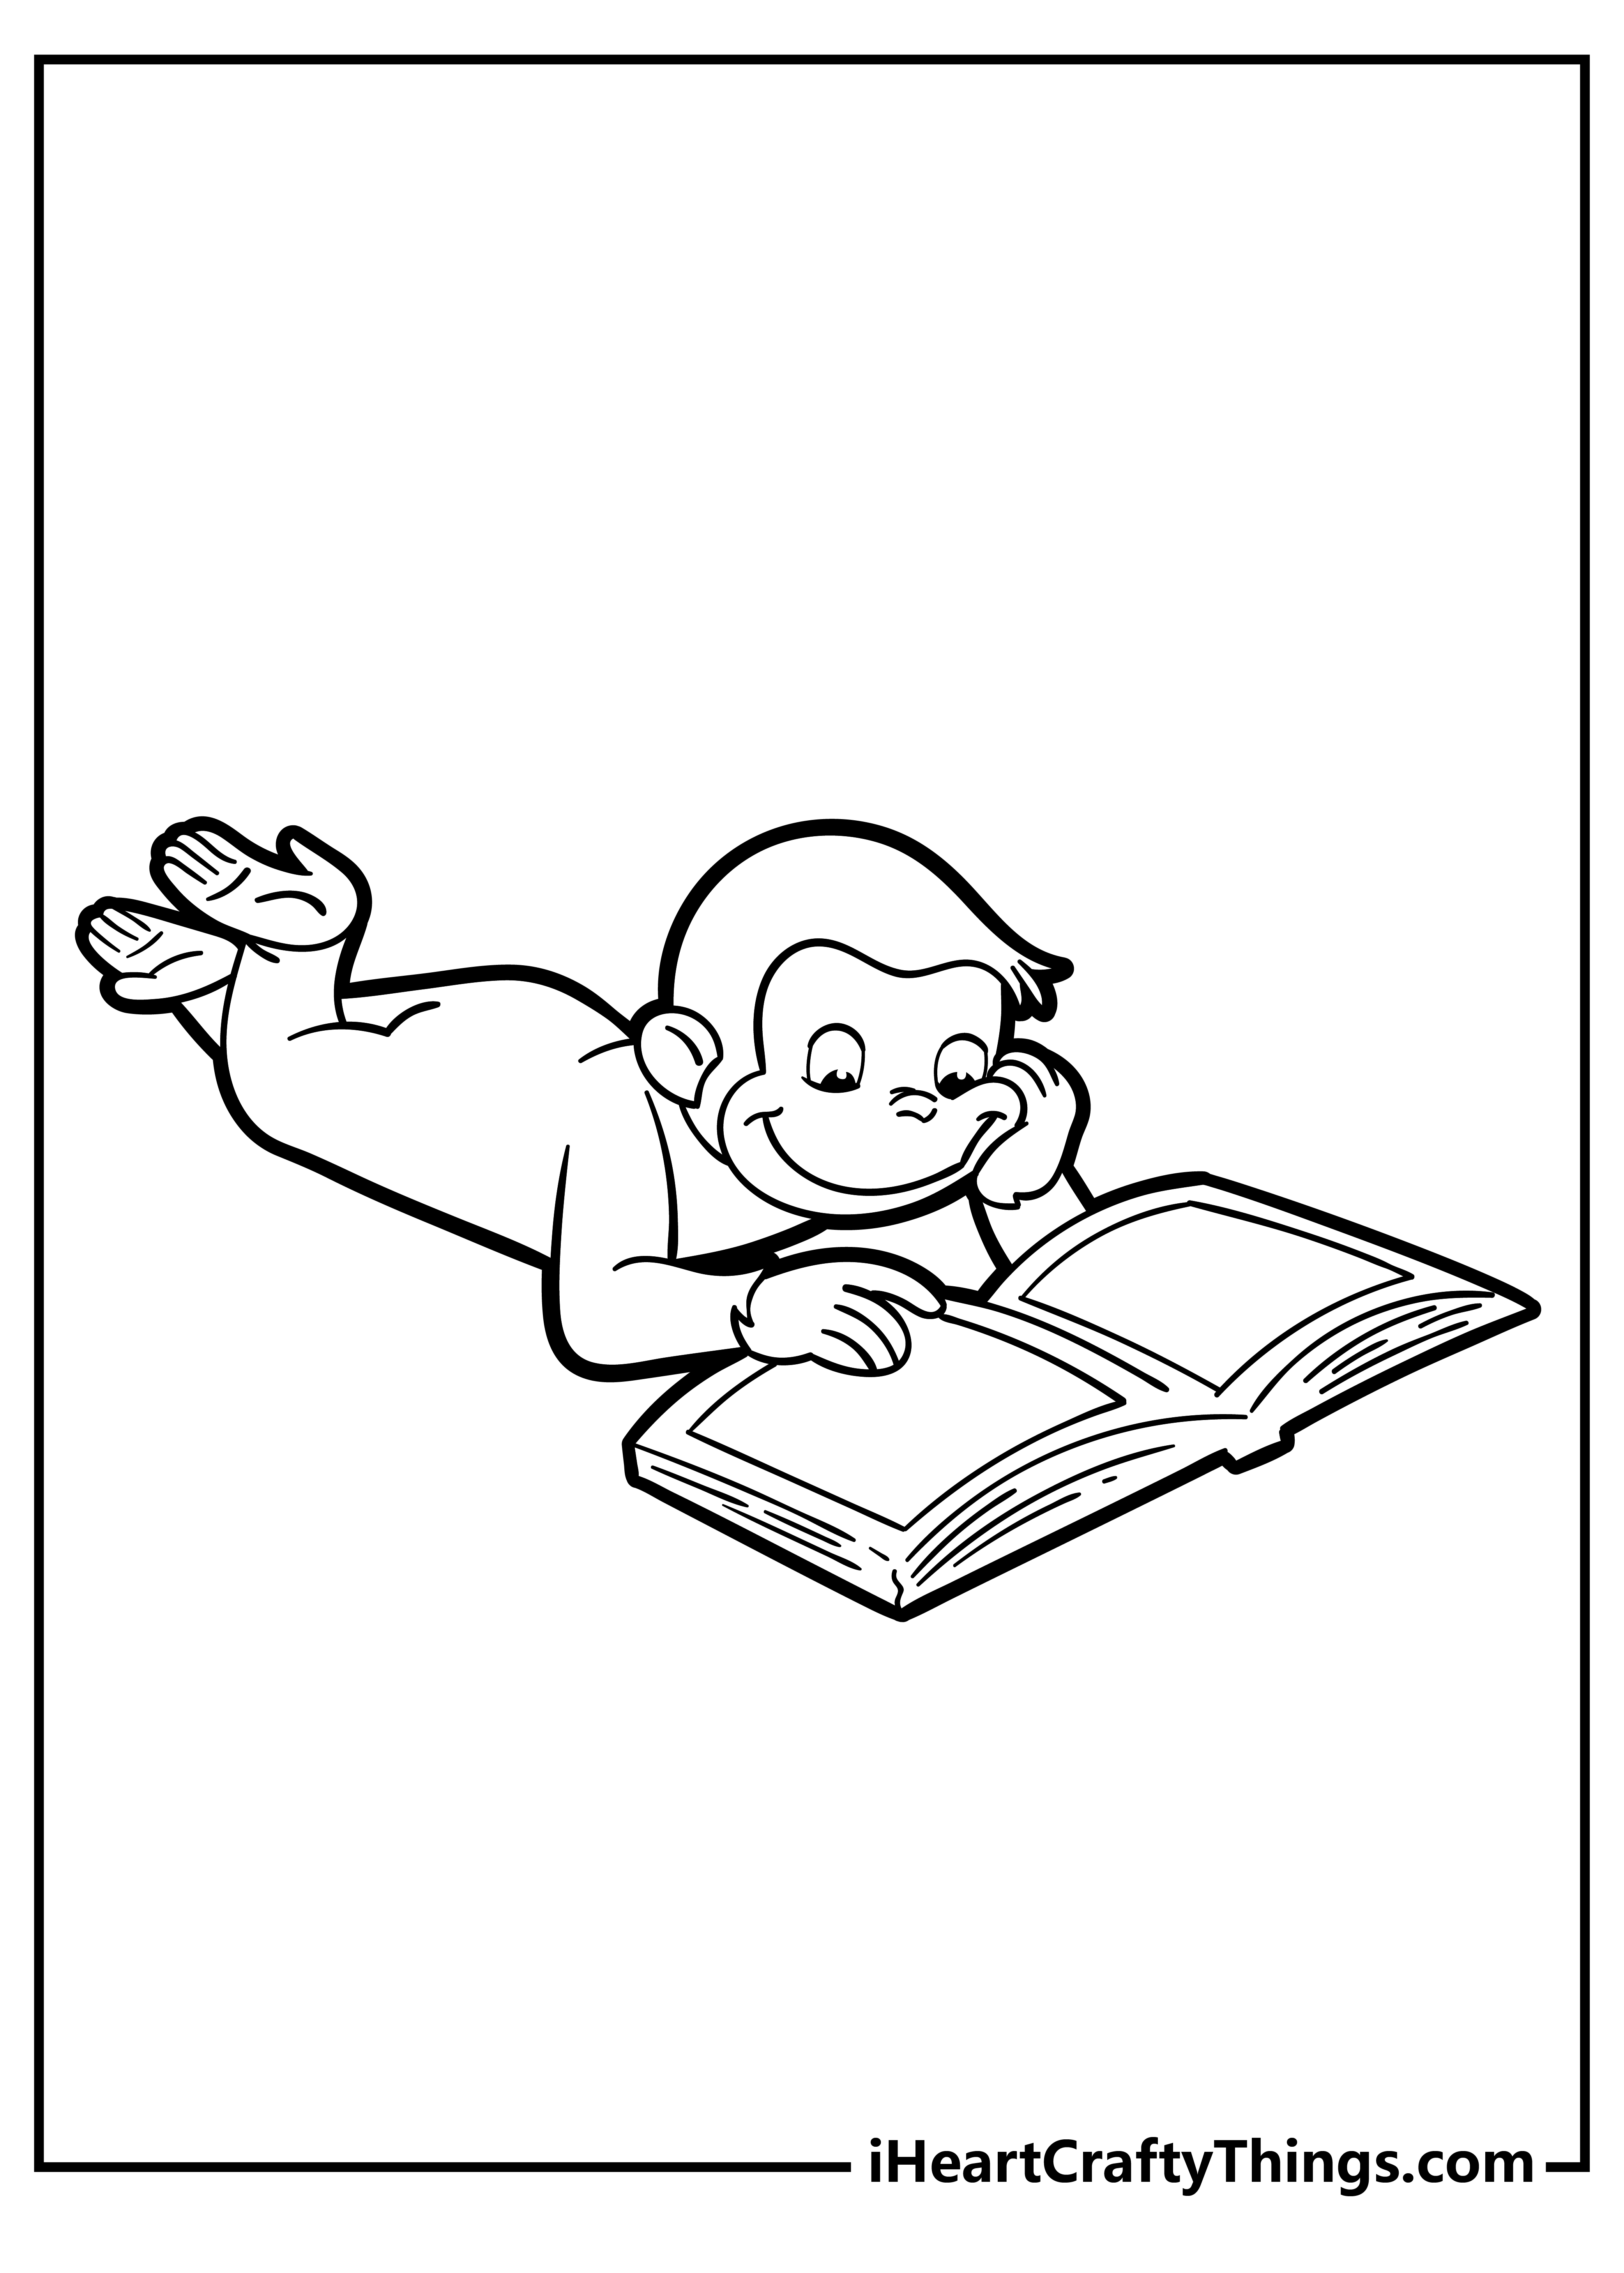 Curious George Coloring Book for kids free printable